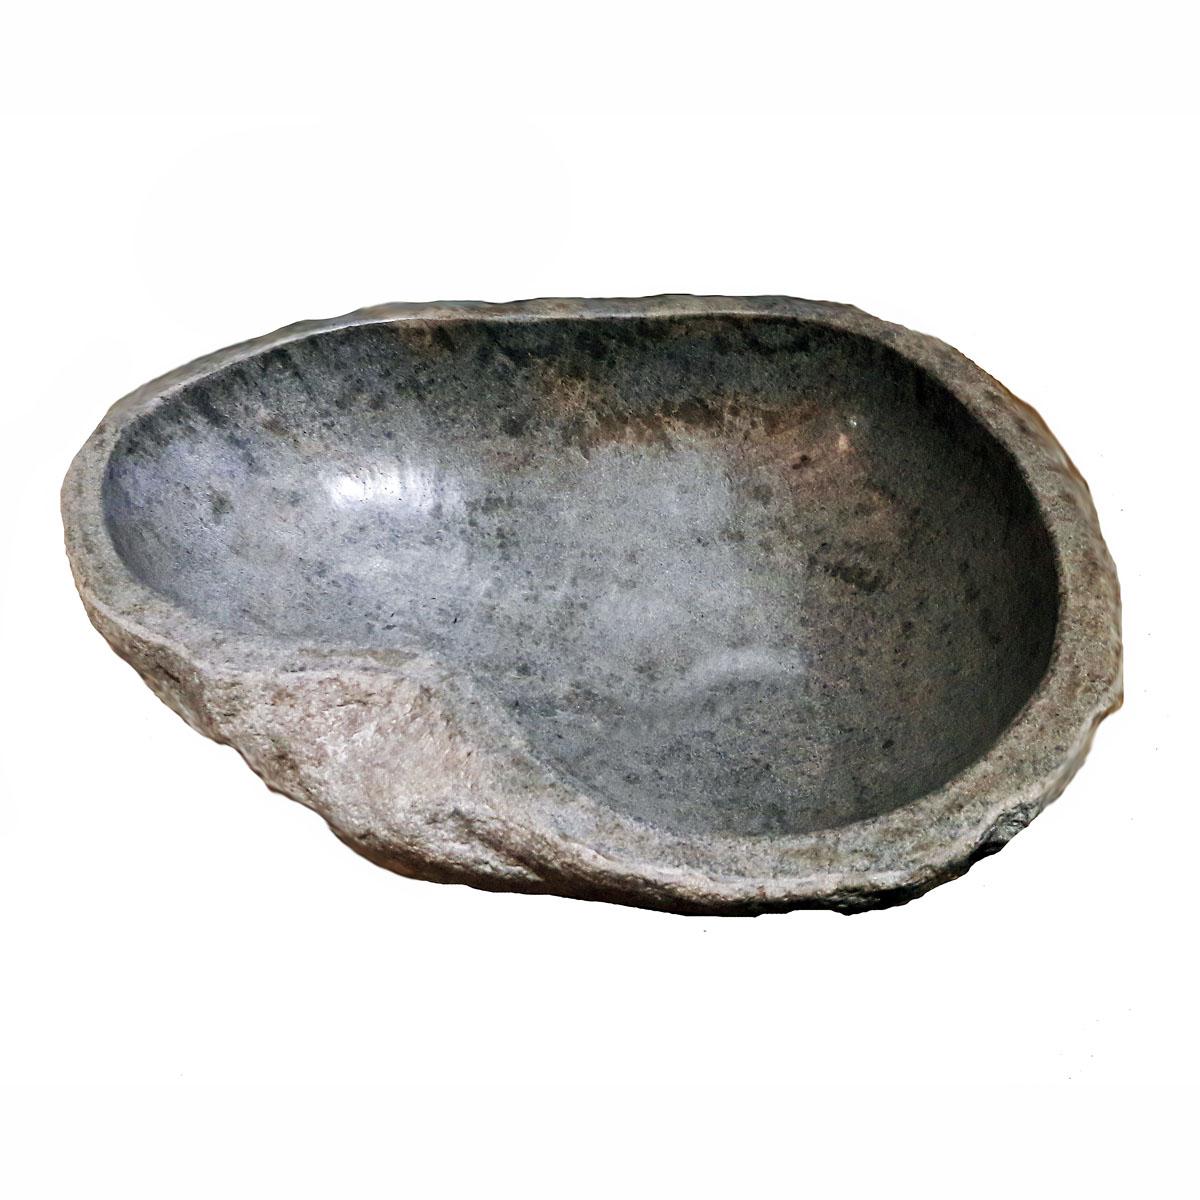 Indonesian River Stone Basin or Sink from Indonesia